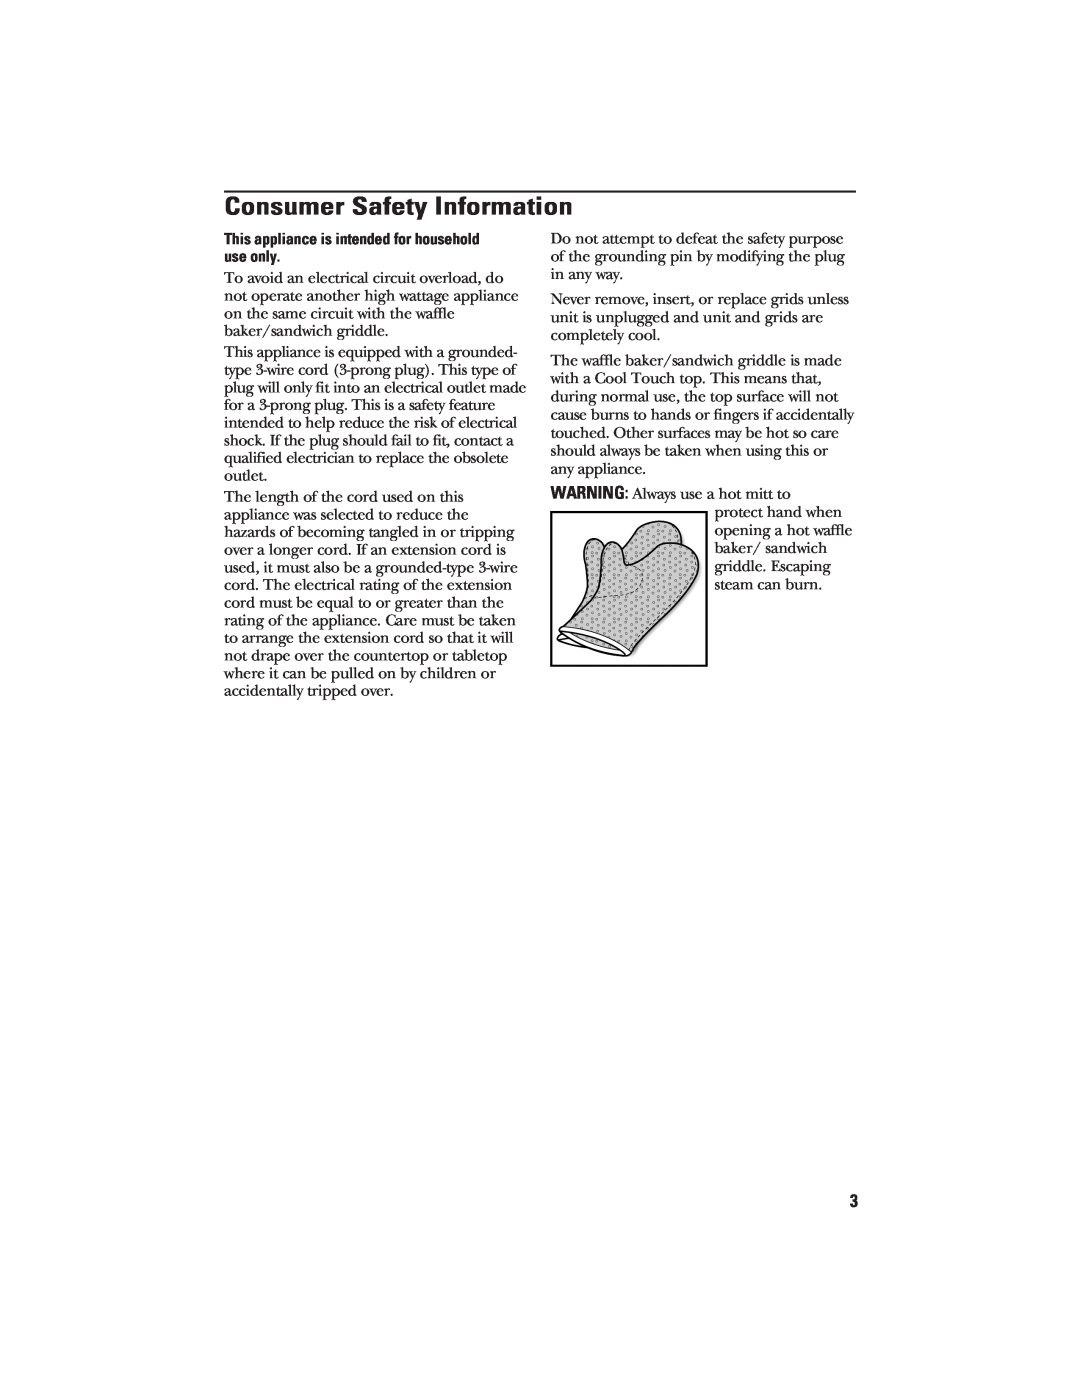 GE 106748 manual Consumer Safety Information, This appliance is intended for household use only 